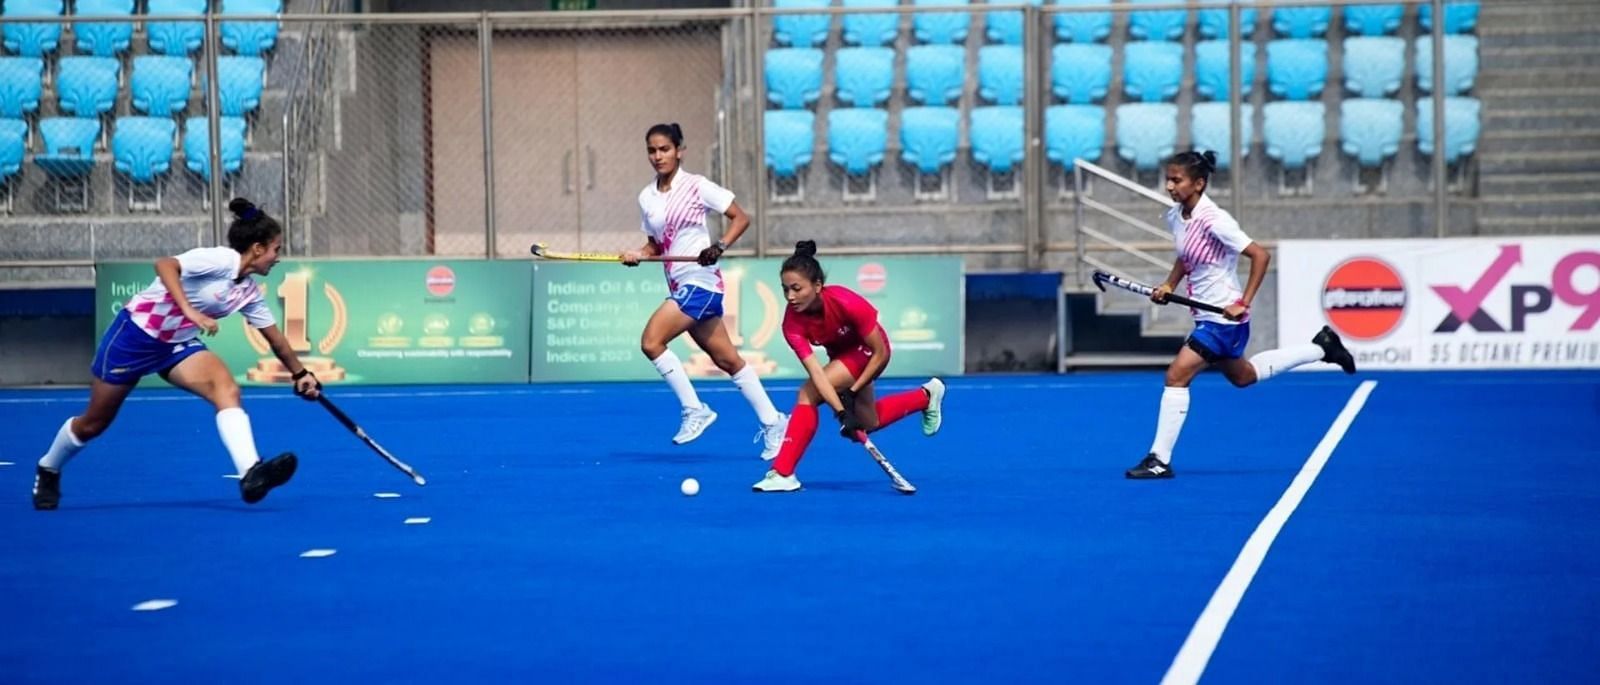 A snap from Senior Women&rsquo;s Inter-department Championship (Image via Hockey India)